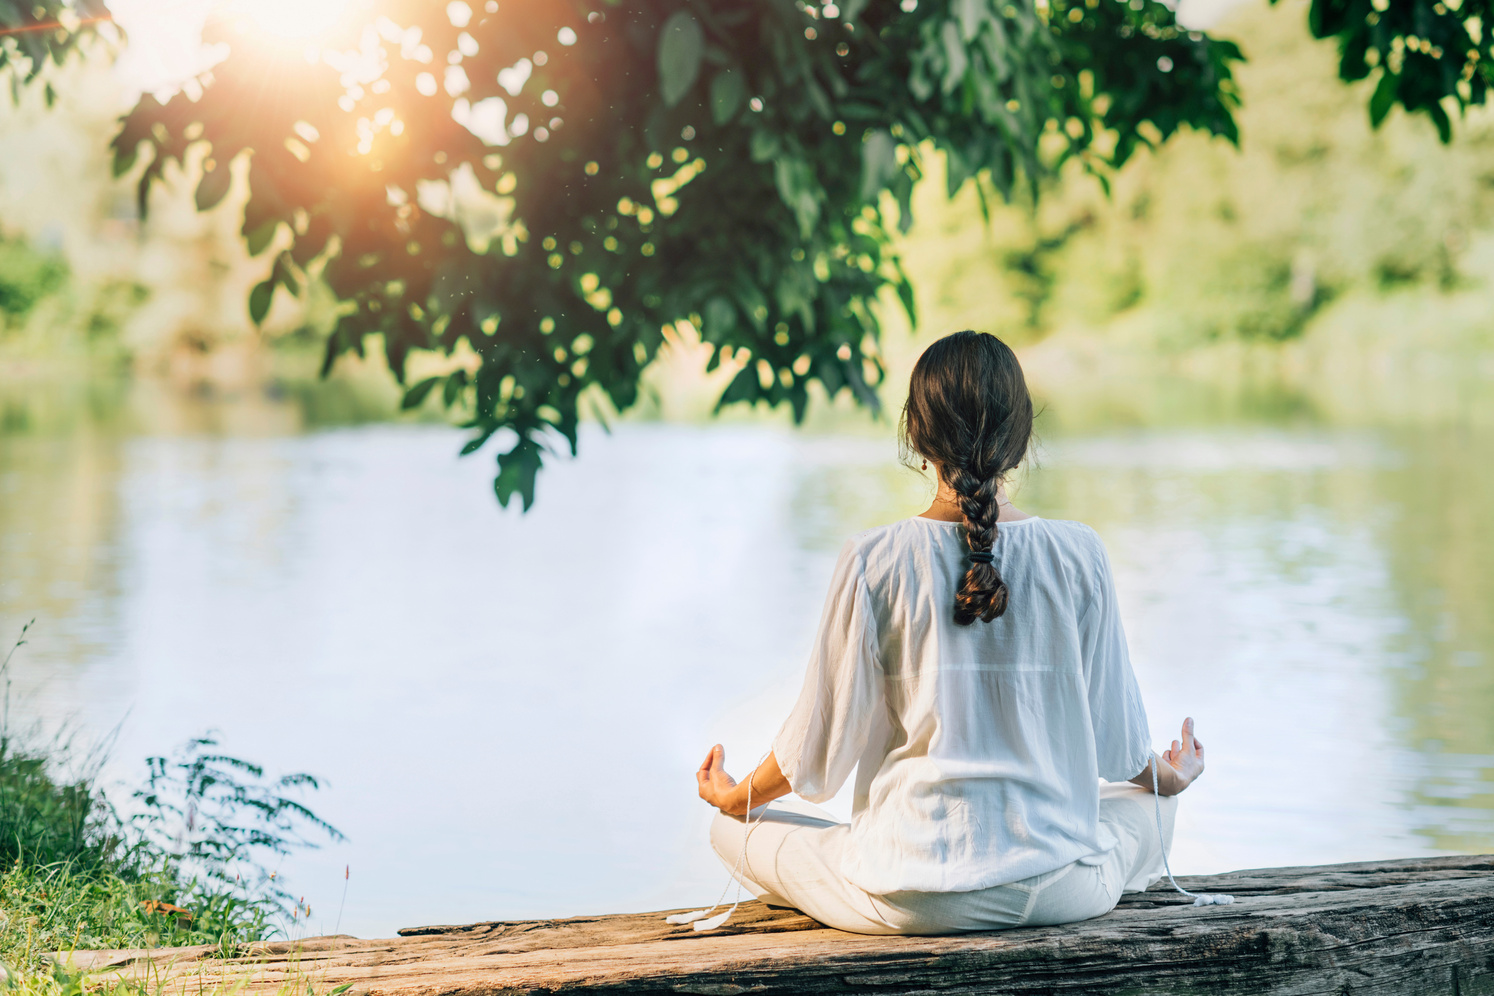 Yoga Retreat. Peaceful Young Woman Sitting In Lotus Position And Meditating By The Lake